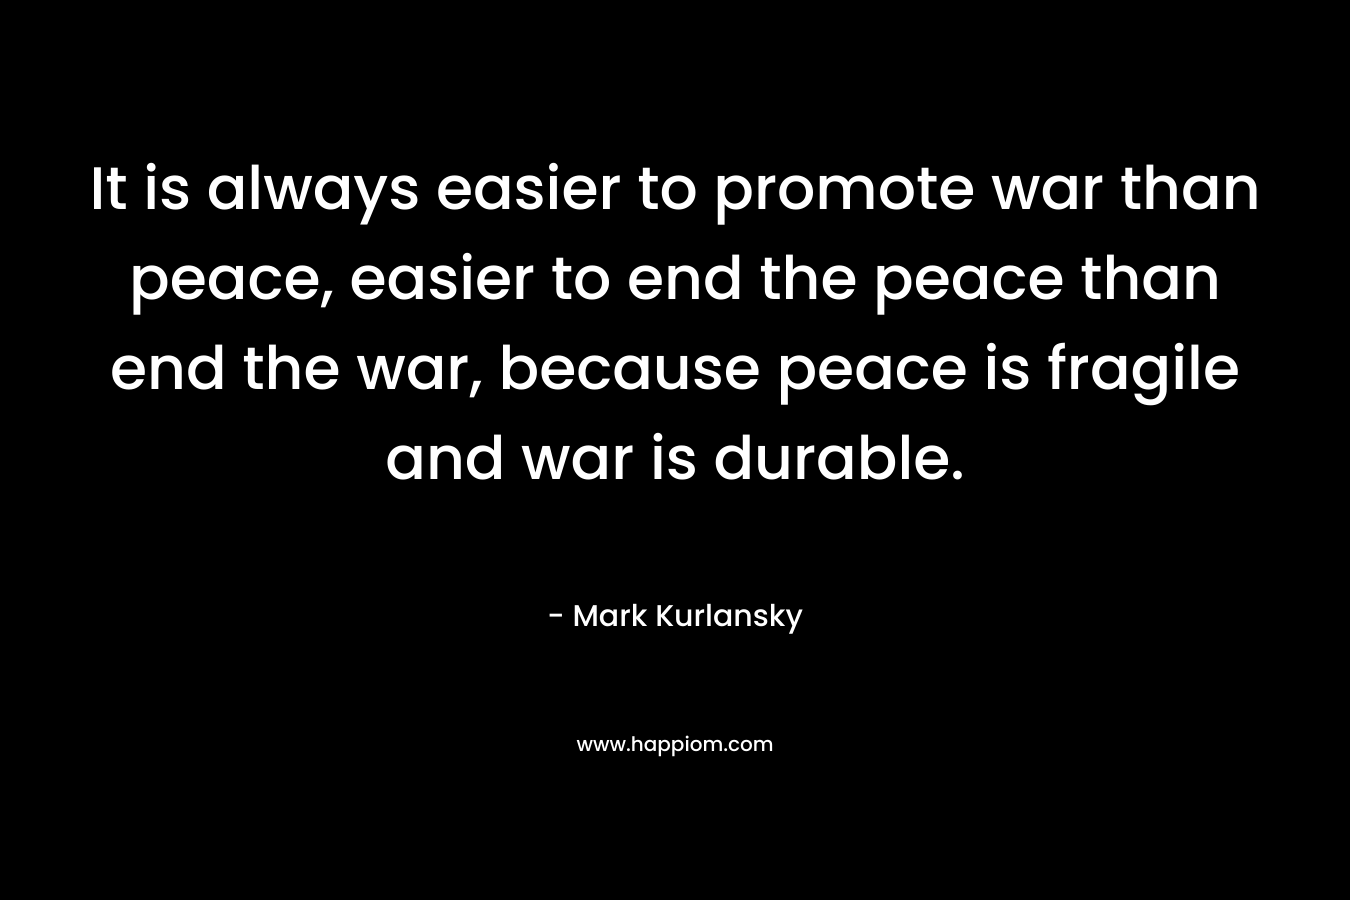 It is always easier to promote war than peace, easier to end the peace than end the war, because peace is fragile and war is durable.